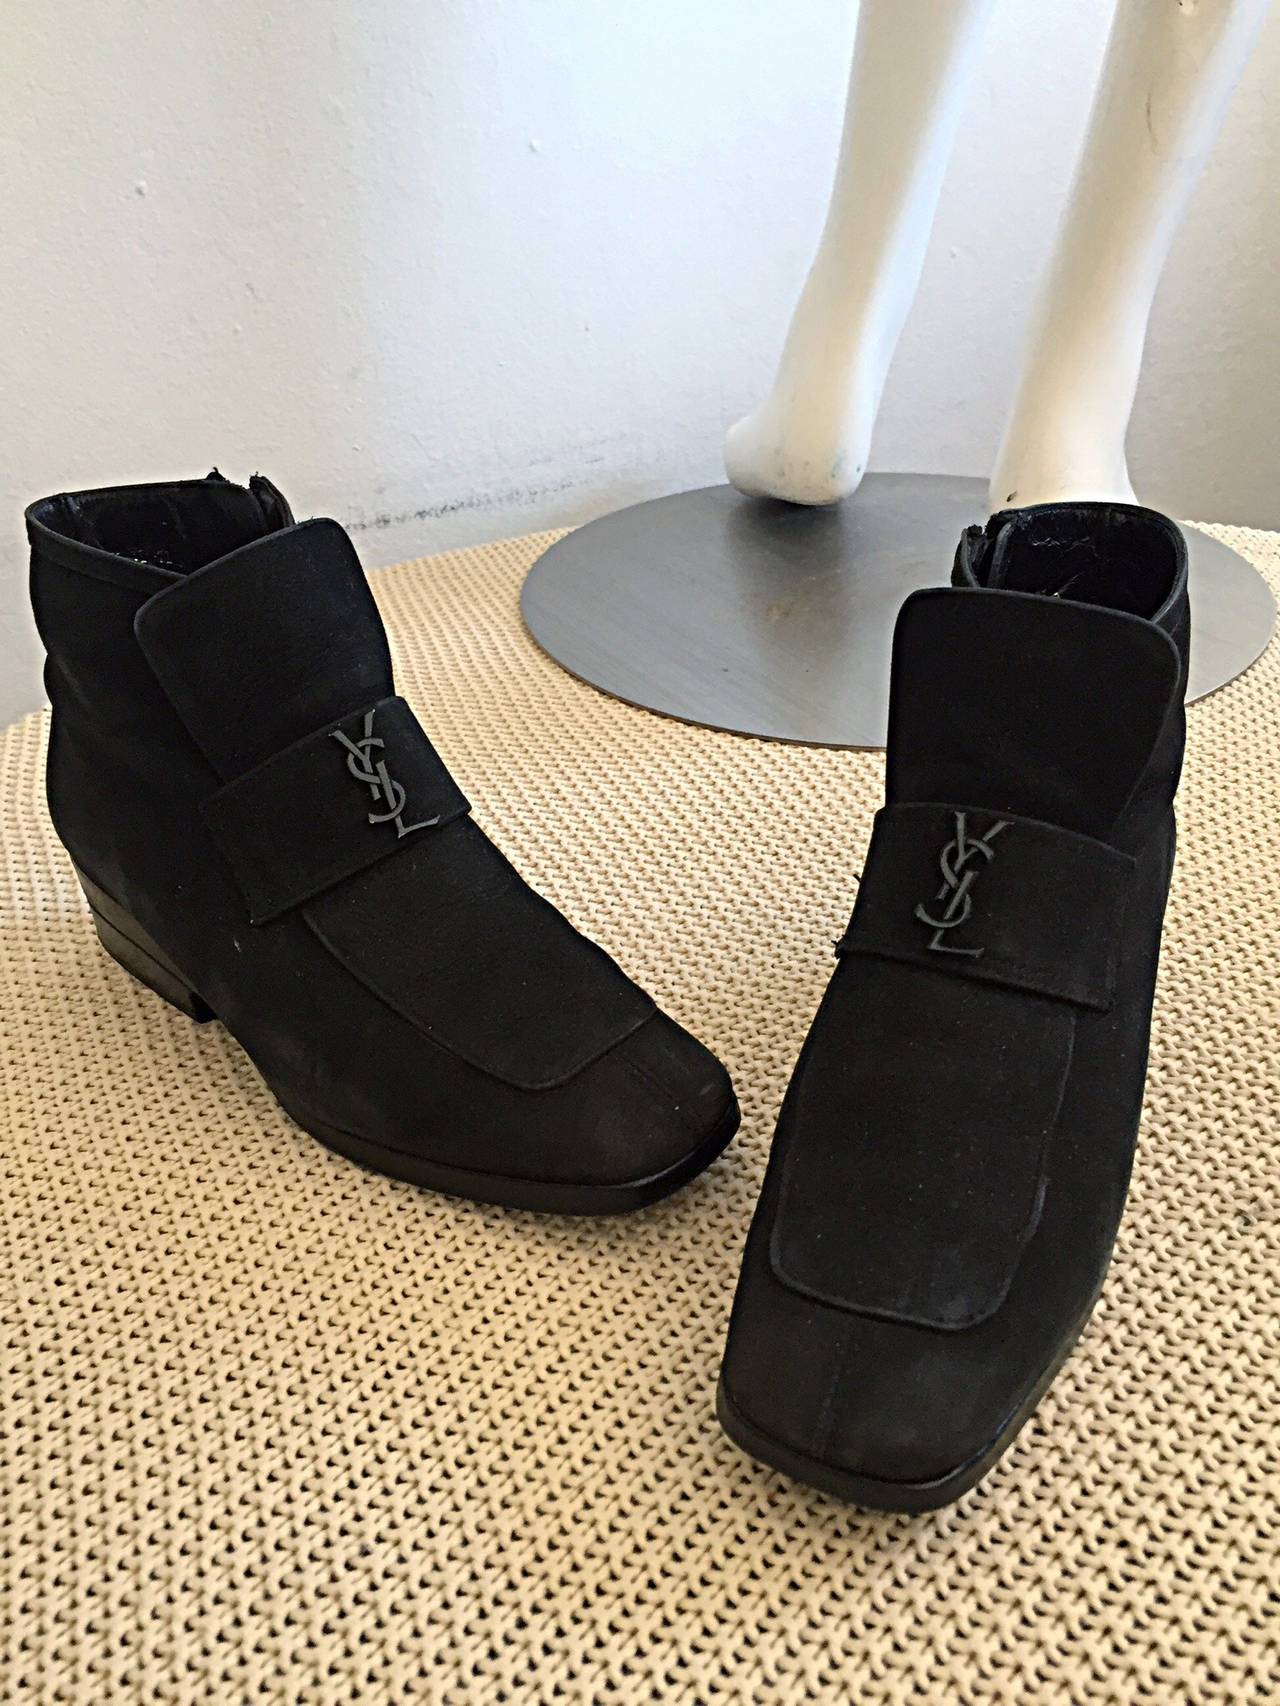 Rare vintage YSL 1960s leather booties! Wonderful style, with YSL logo right below the tongue. Zipper up interior side. Yves Saint Laurent discretly spelt out on back heel. Can easily be dressed up or down. Looks great with jeans, a skirt, a dress,